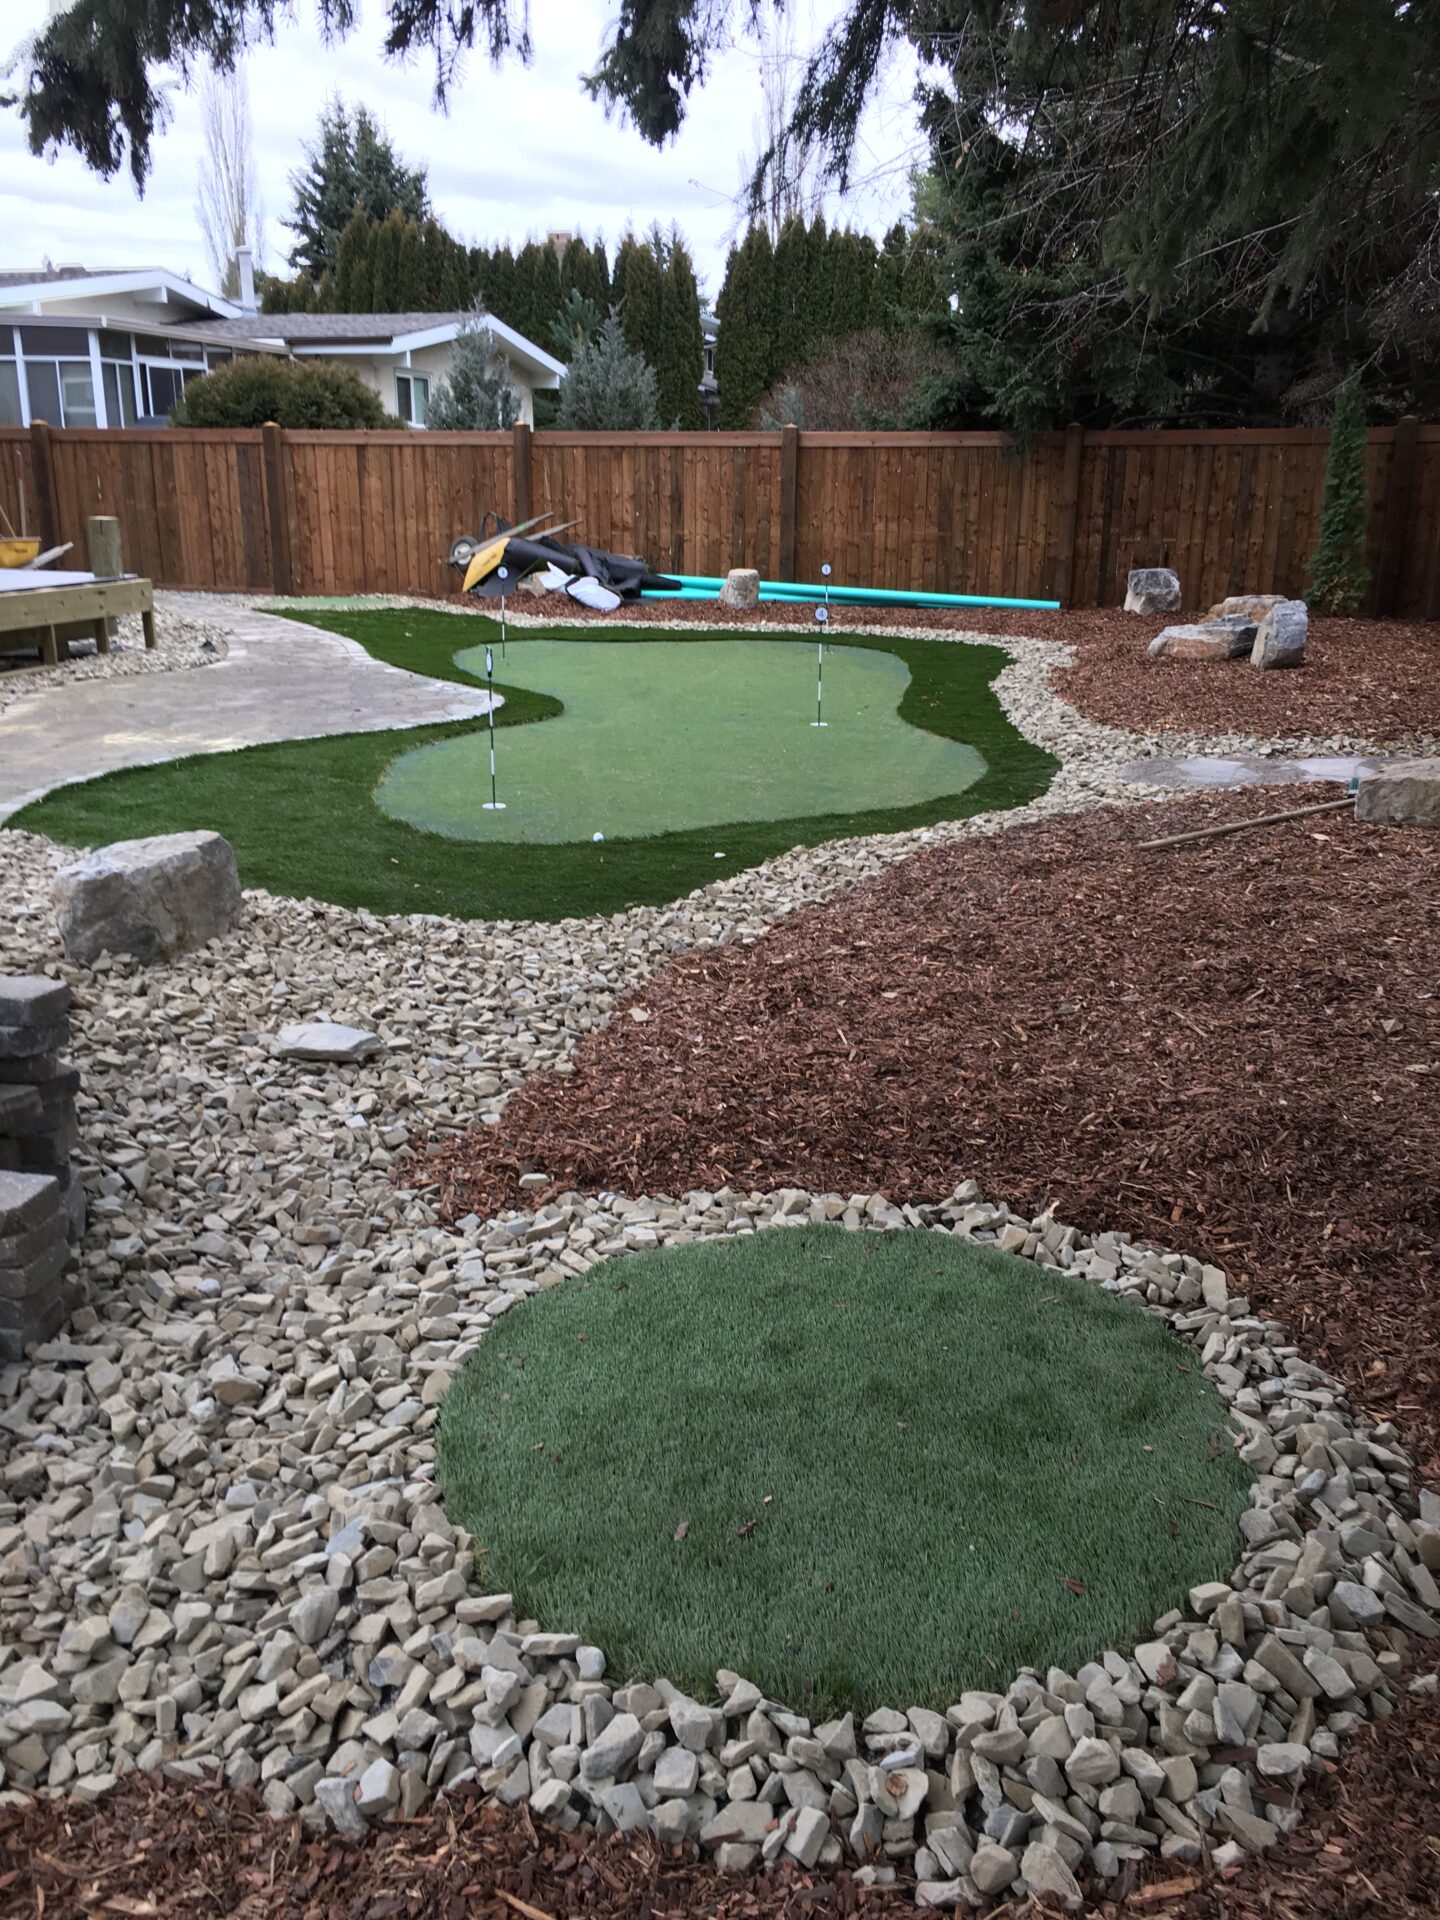 Fun Golf Landscaping Design Comes To Life In St. Albert Backyard